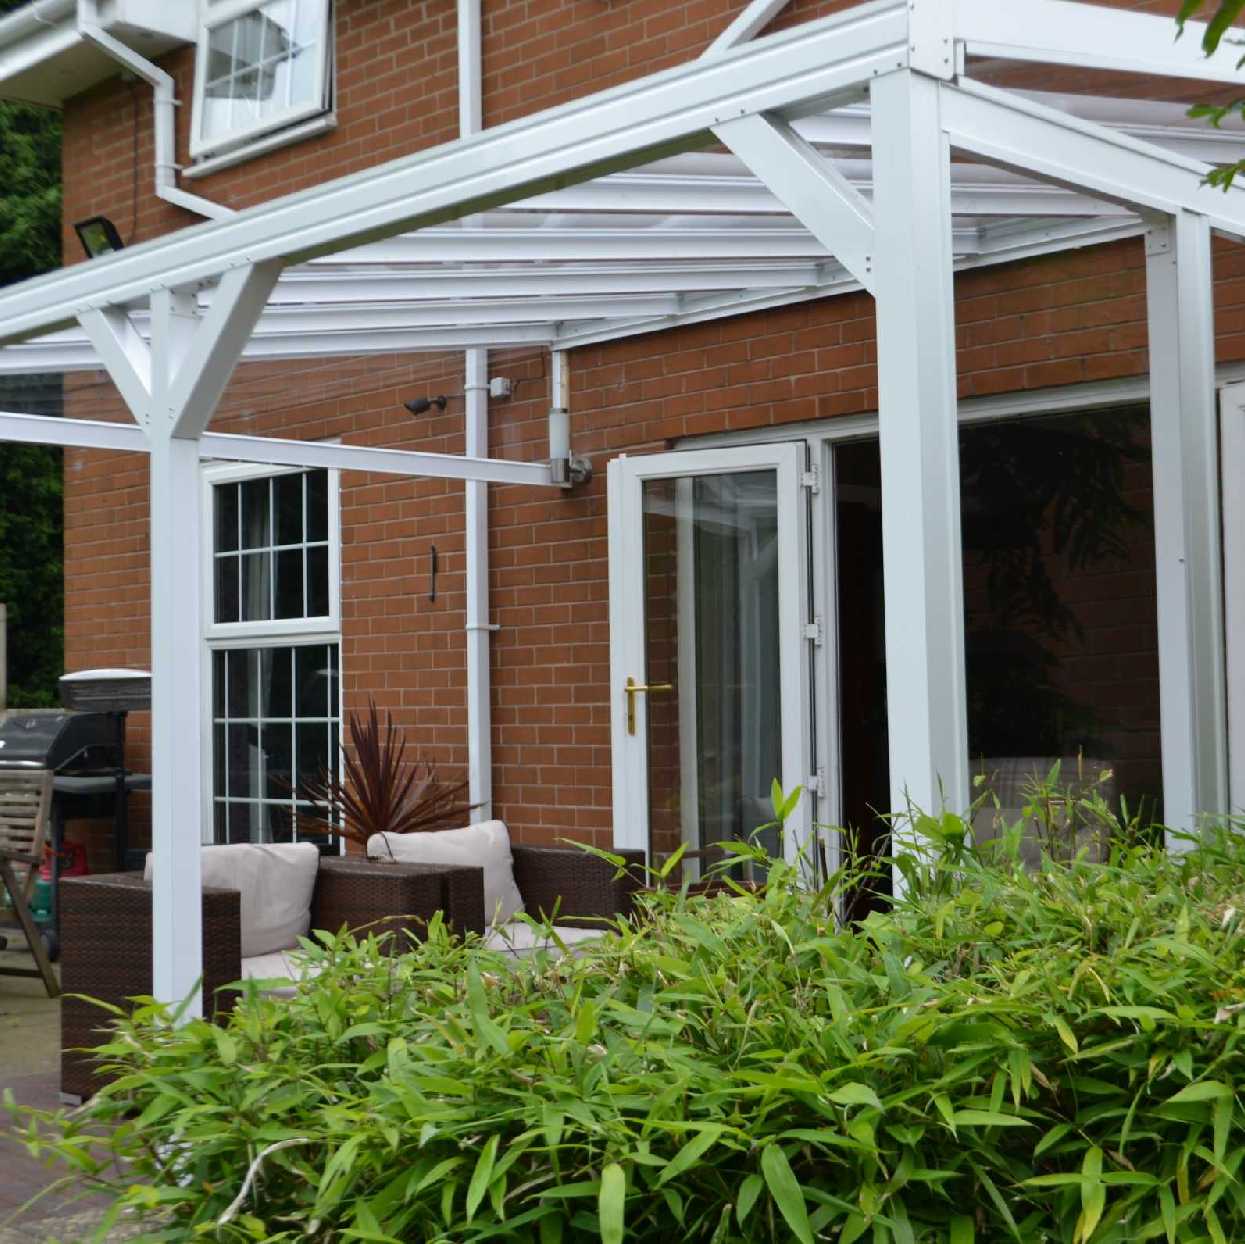 Omega Smart Lean-To Canopy, White UNGLAZED for 6mm Glazing - 5.6m (W) x 2.0m (P), (3) Supporting Posts from Omega Build